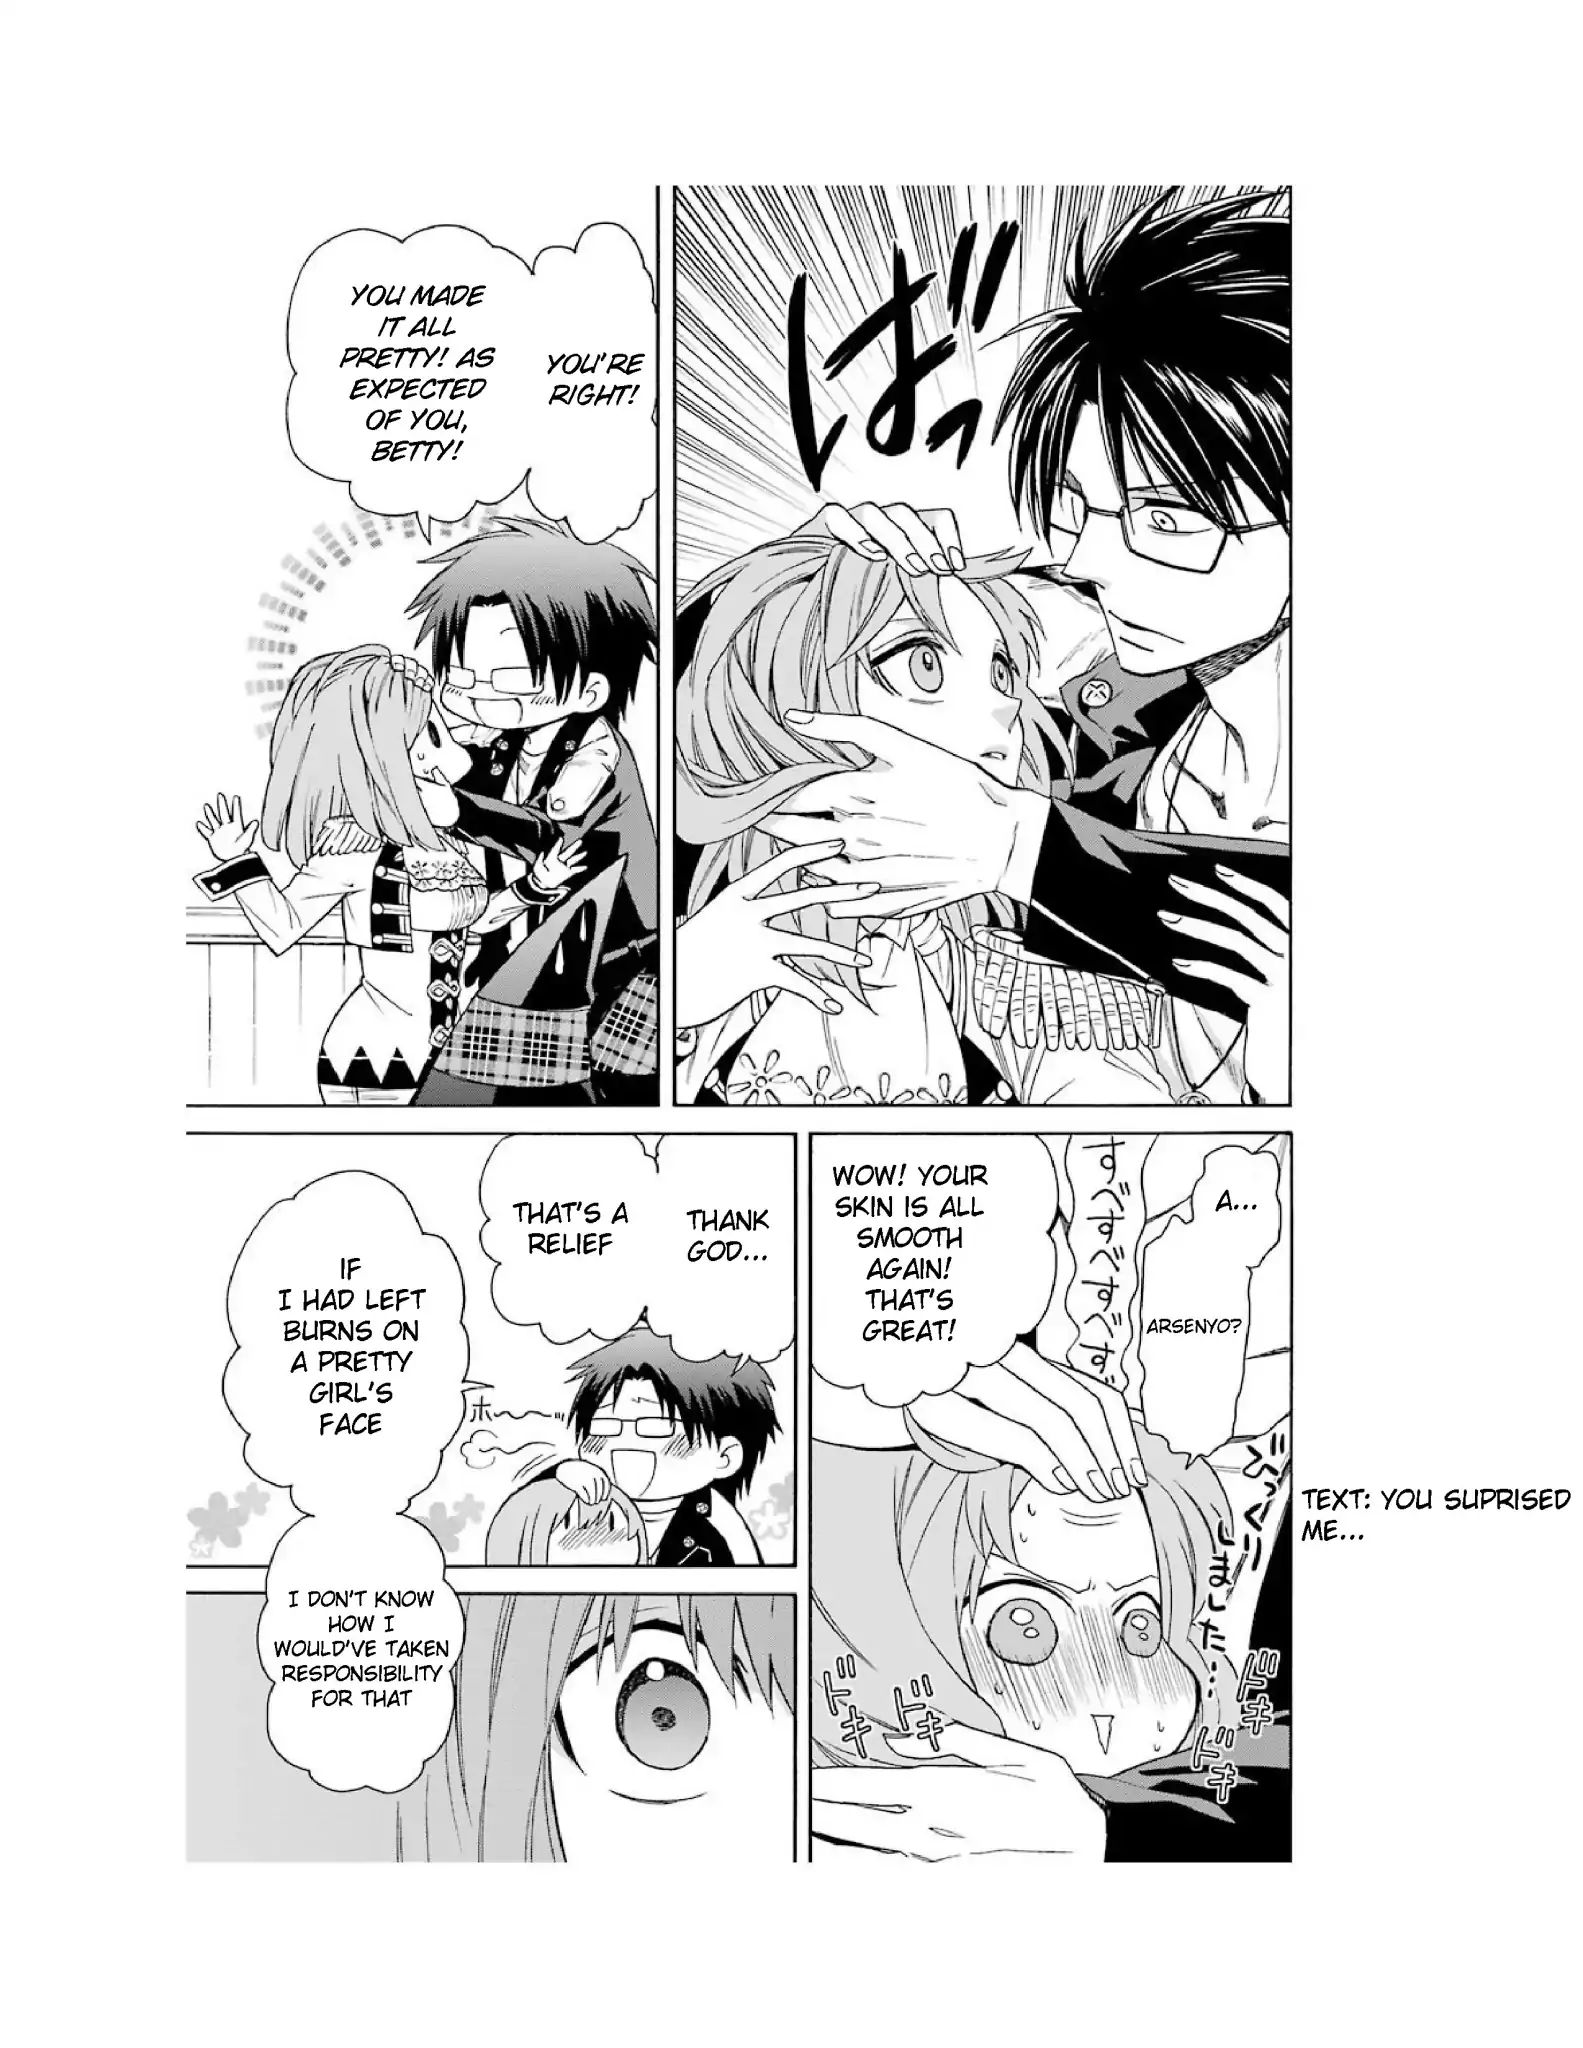 The Witch's Servant and The Demon Lords Horns Vol.1 Chapter 4: The Witche's Servant And The Love Rival